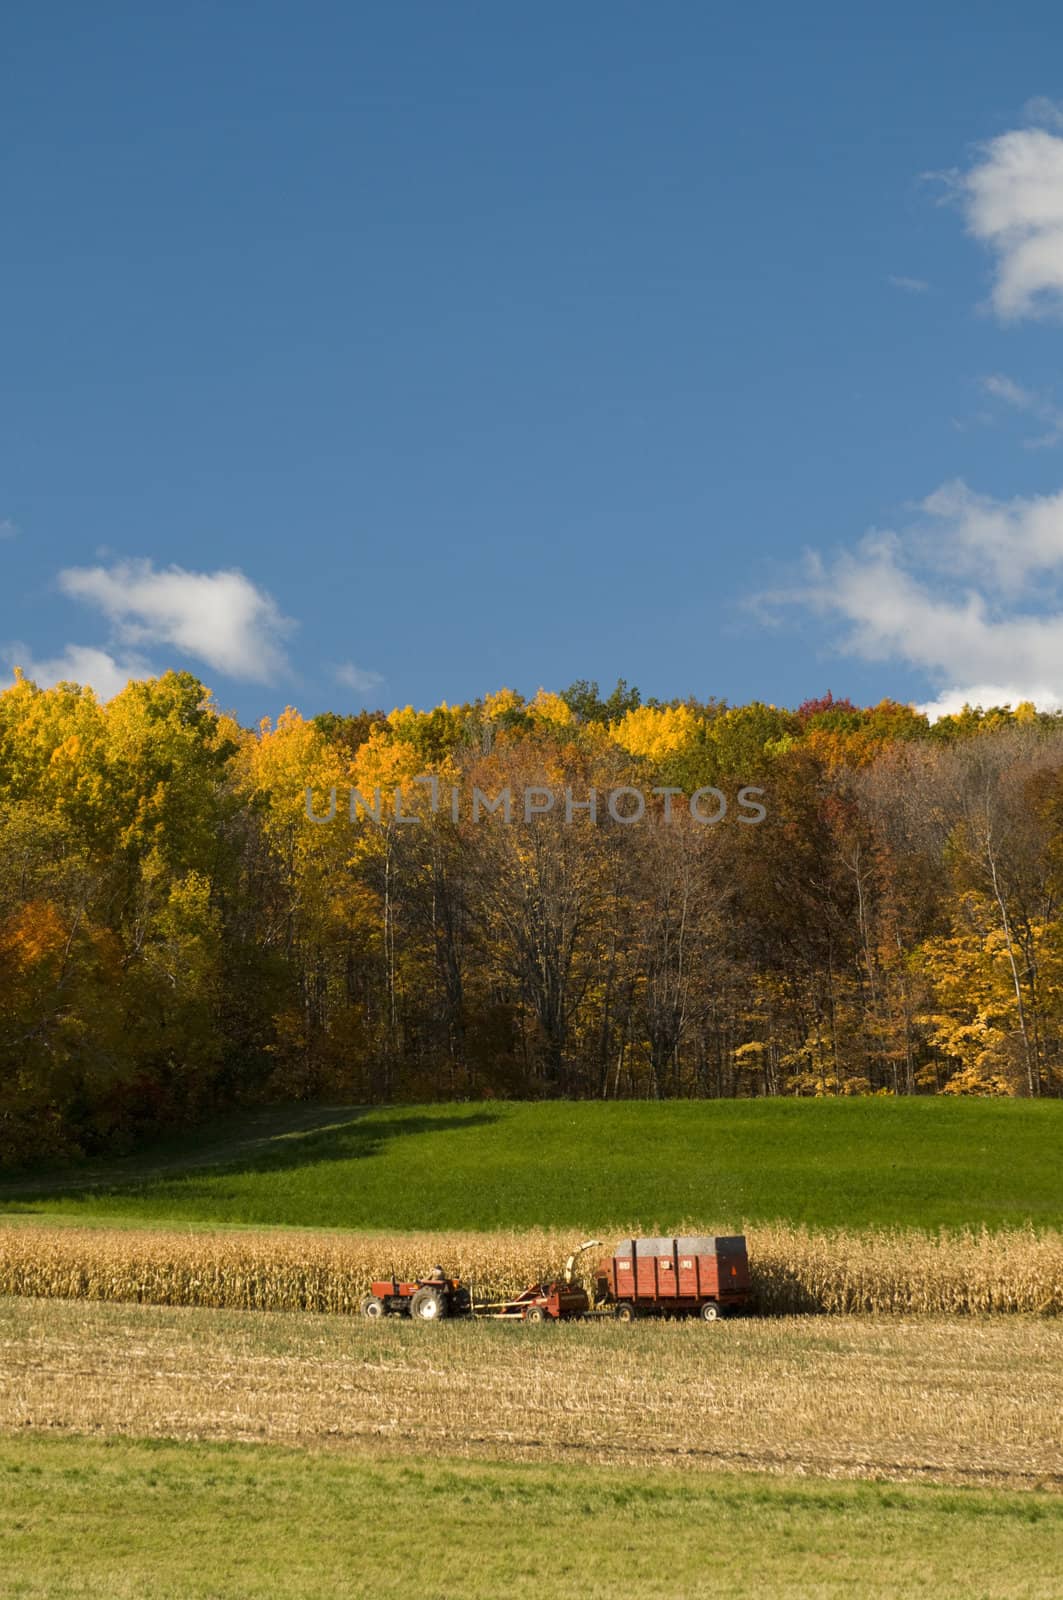 Farmer cutting and harvesting the corn field in the autumn